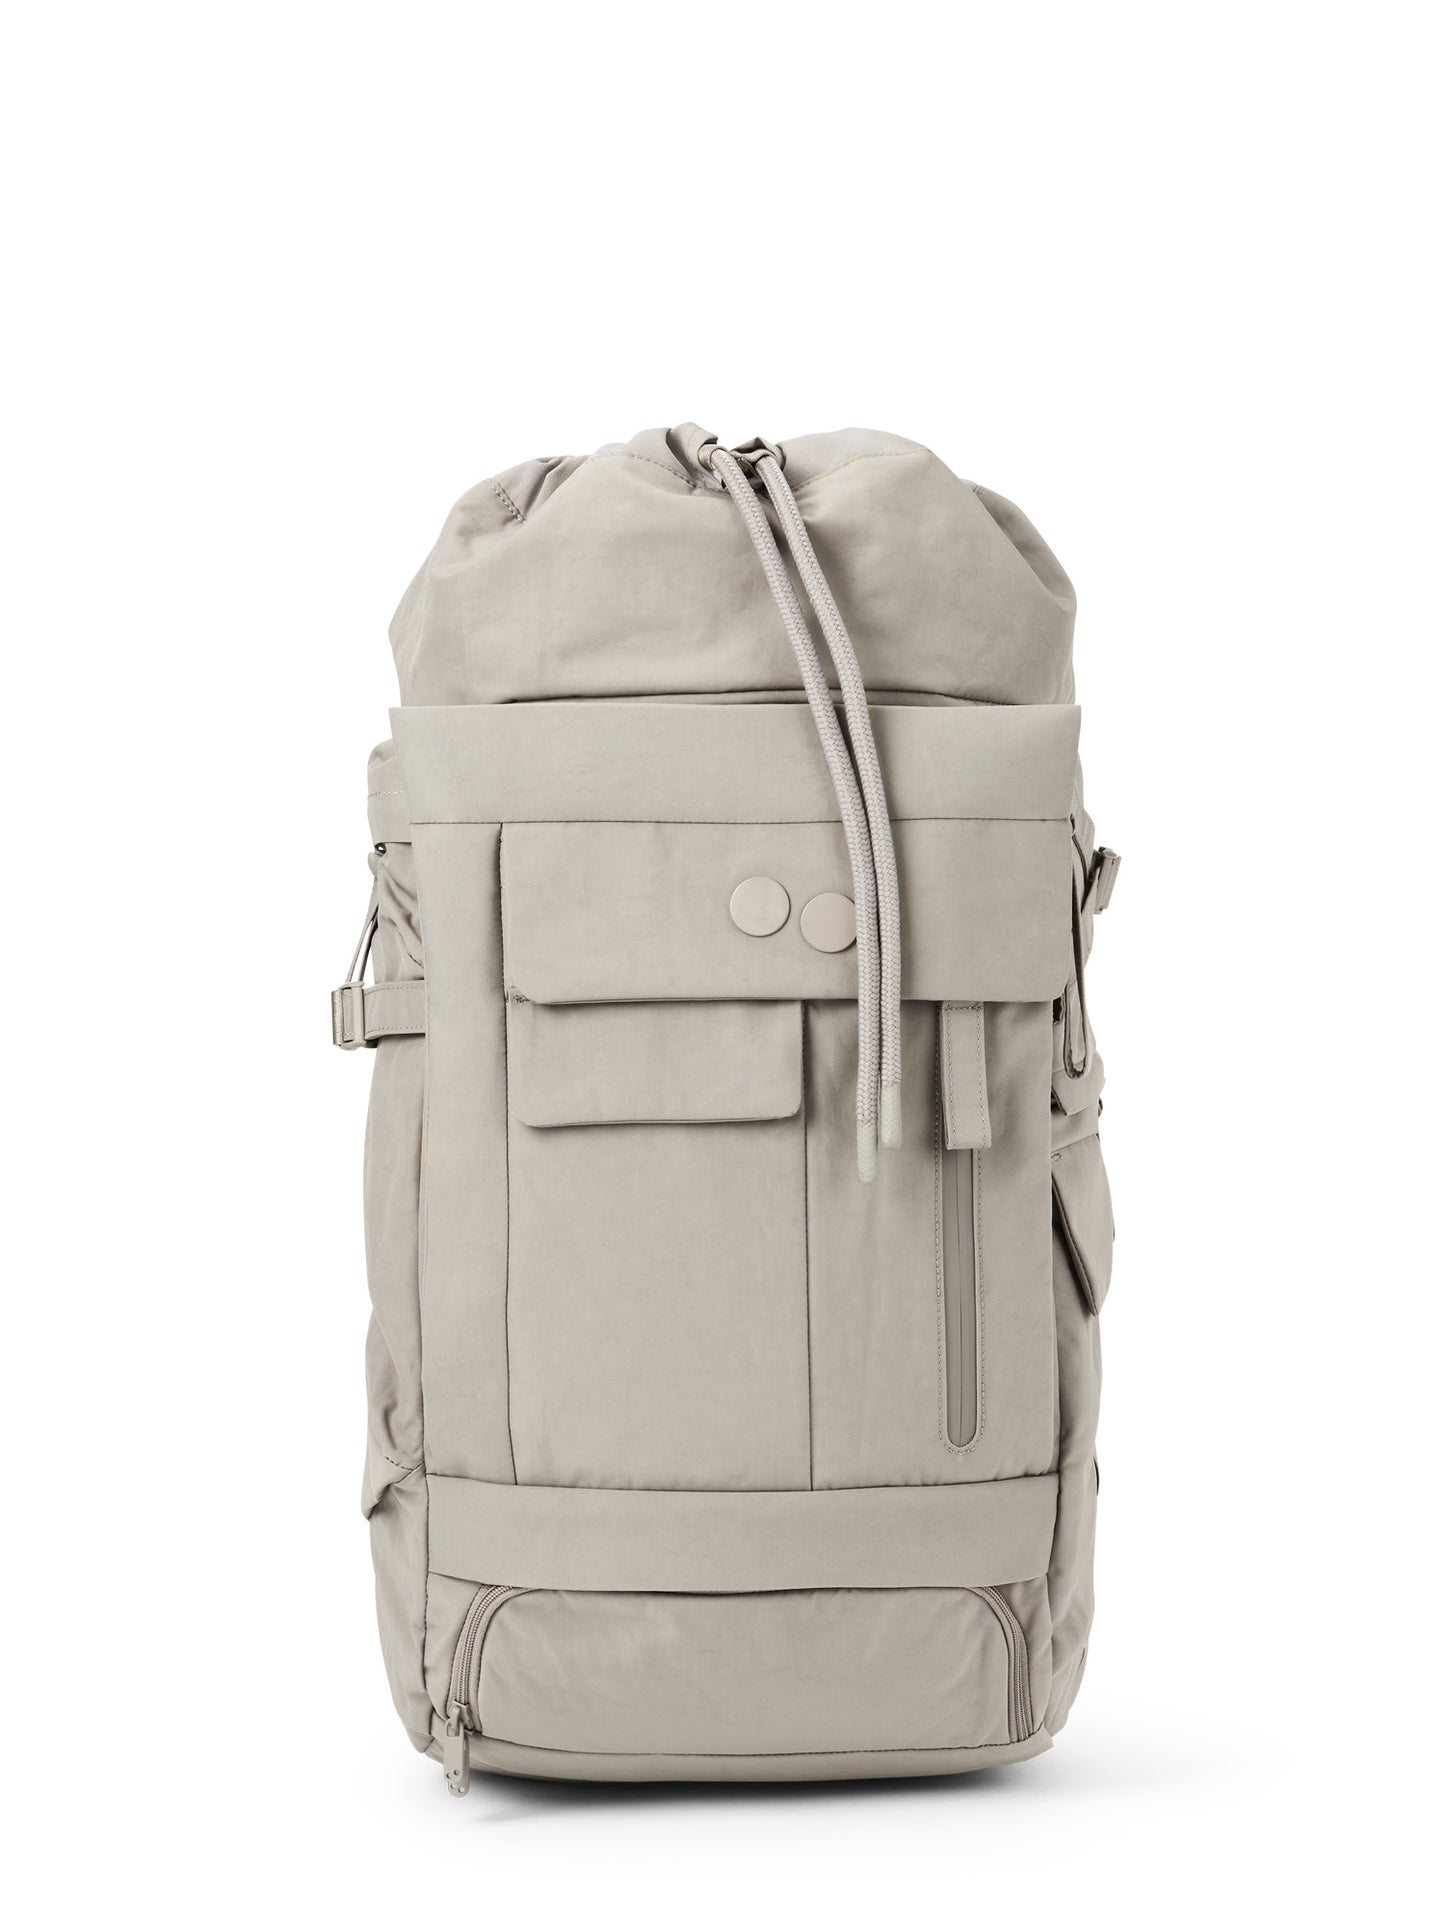 pinqponq-backpack-Blok-Medium-Crinkle-Taupe-front